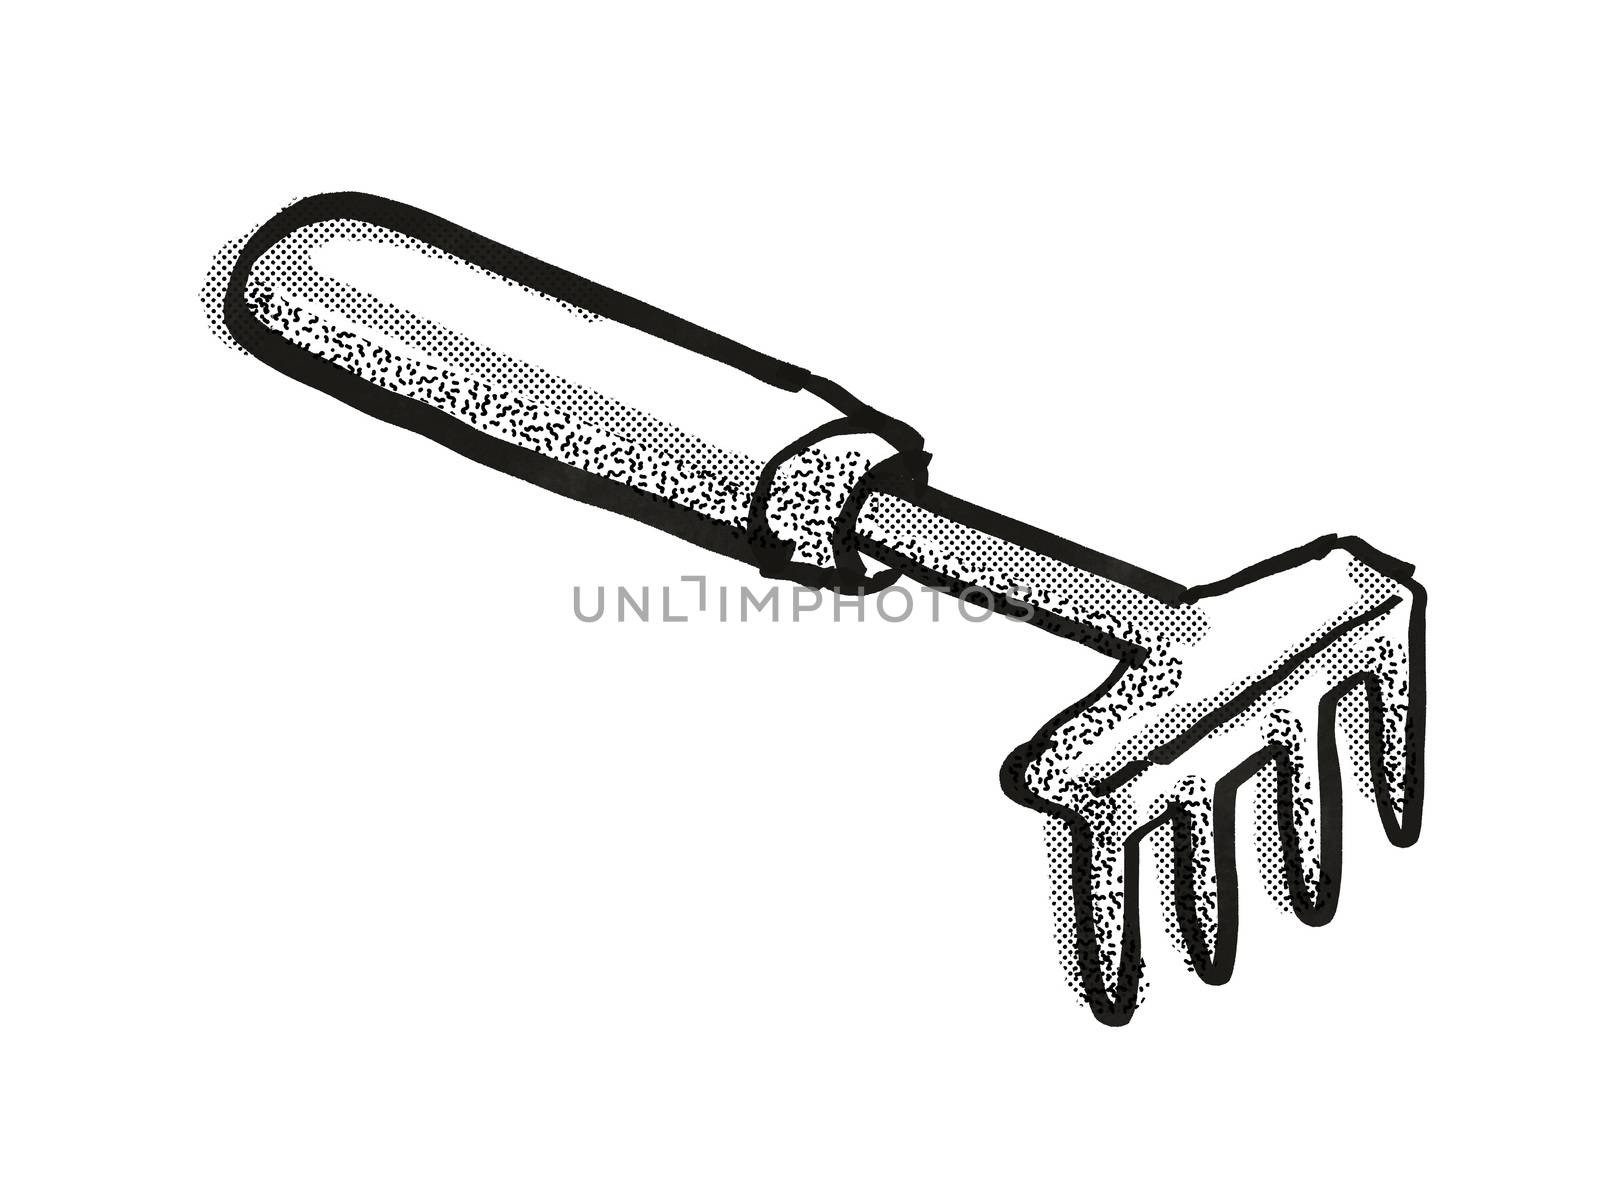 Retro cartoon style drawing of a hand rake , a garden or gardening tool equipment on isolated white background done in black and white